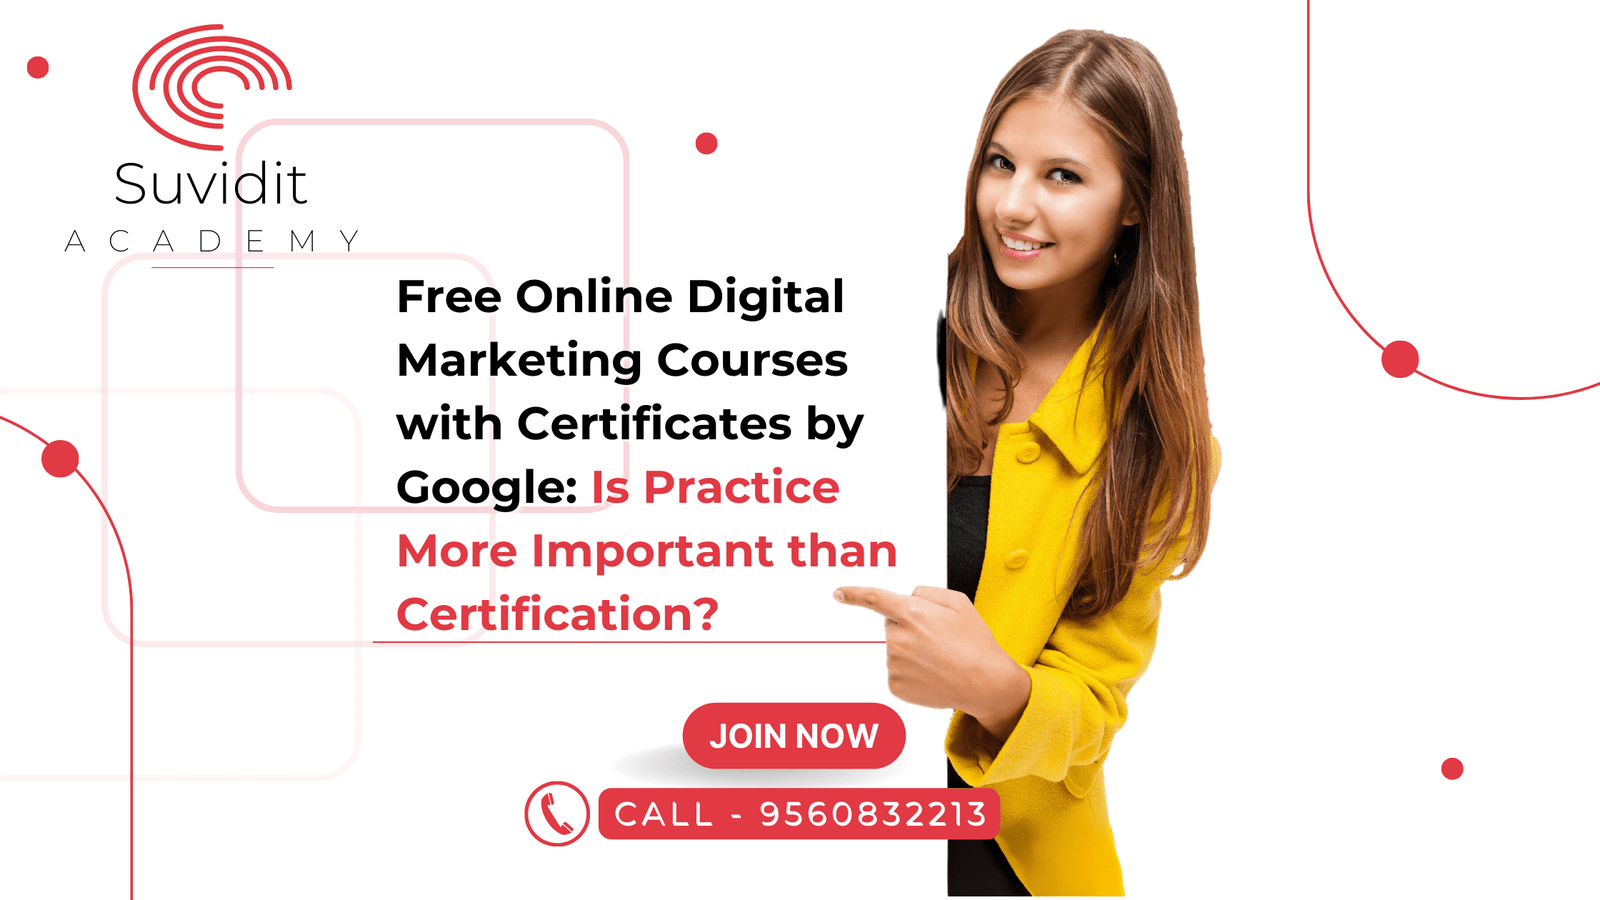 Free Online Digital Marketing Courses with Certificates by Google Is Practice More Important than Certification